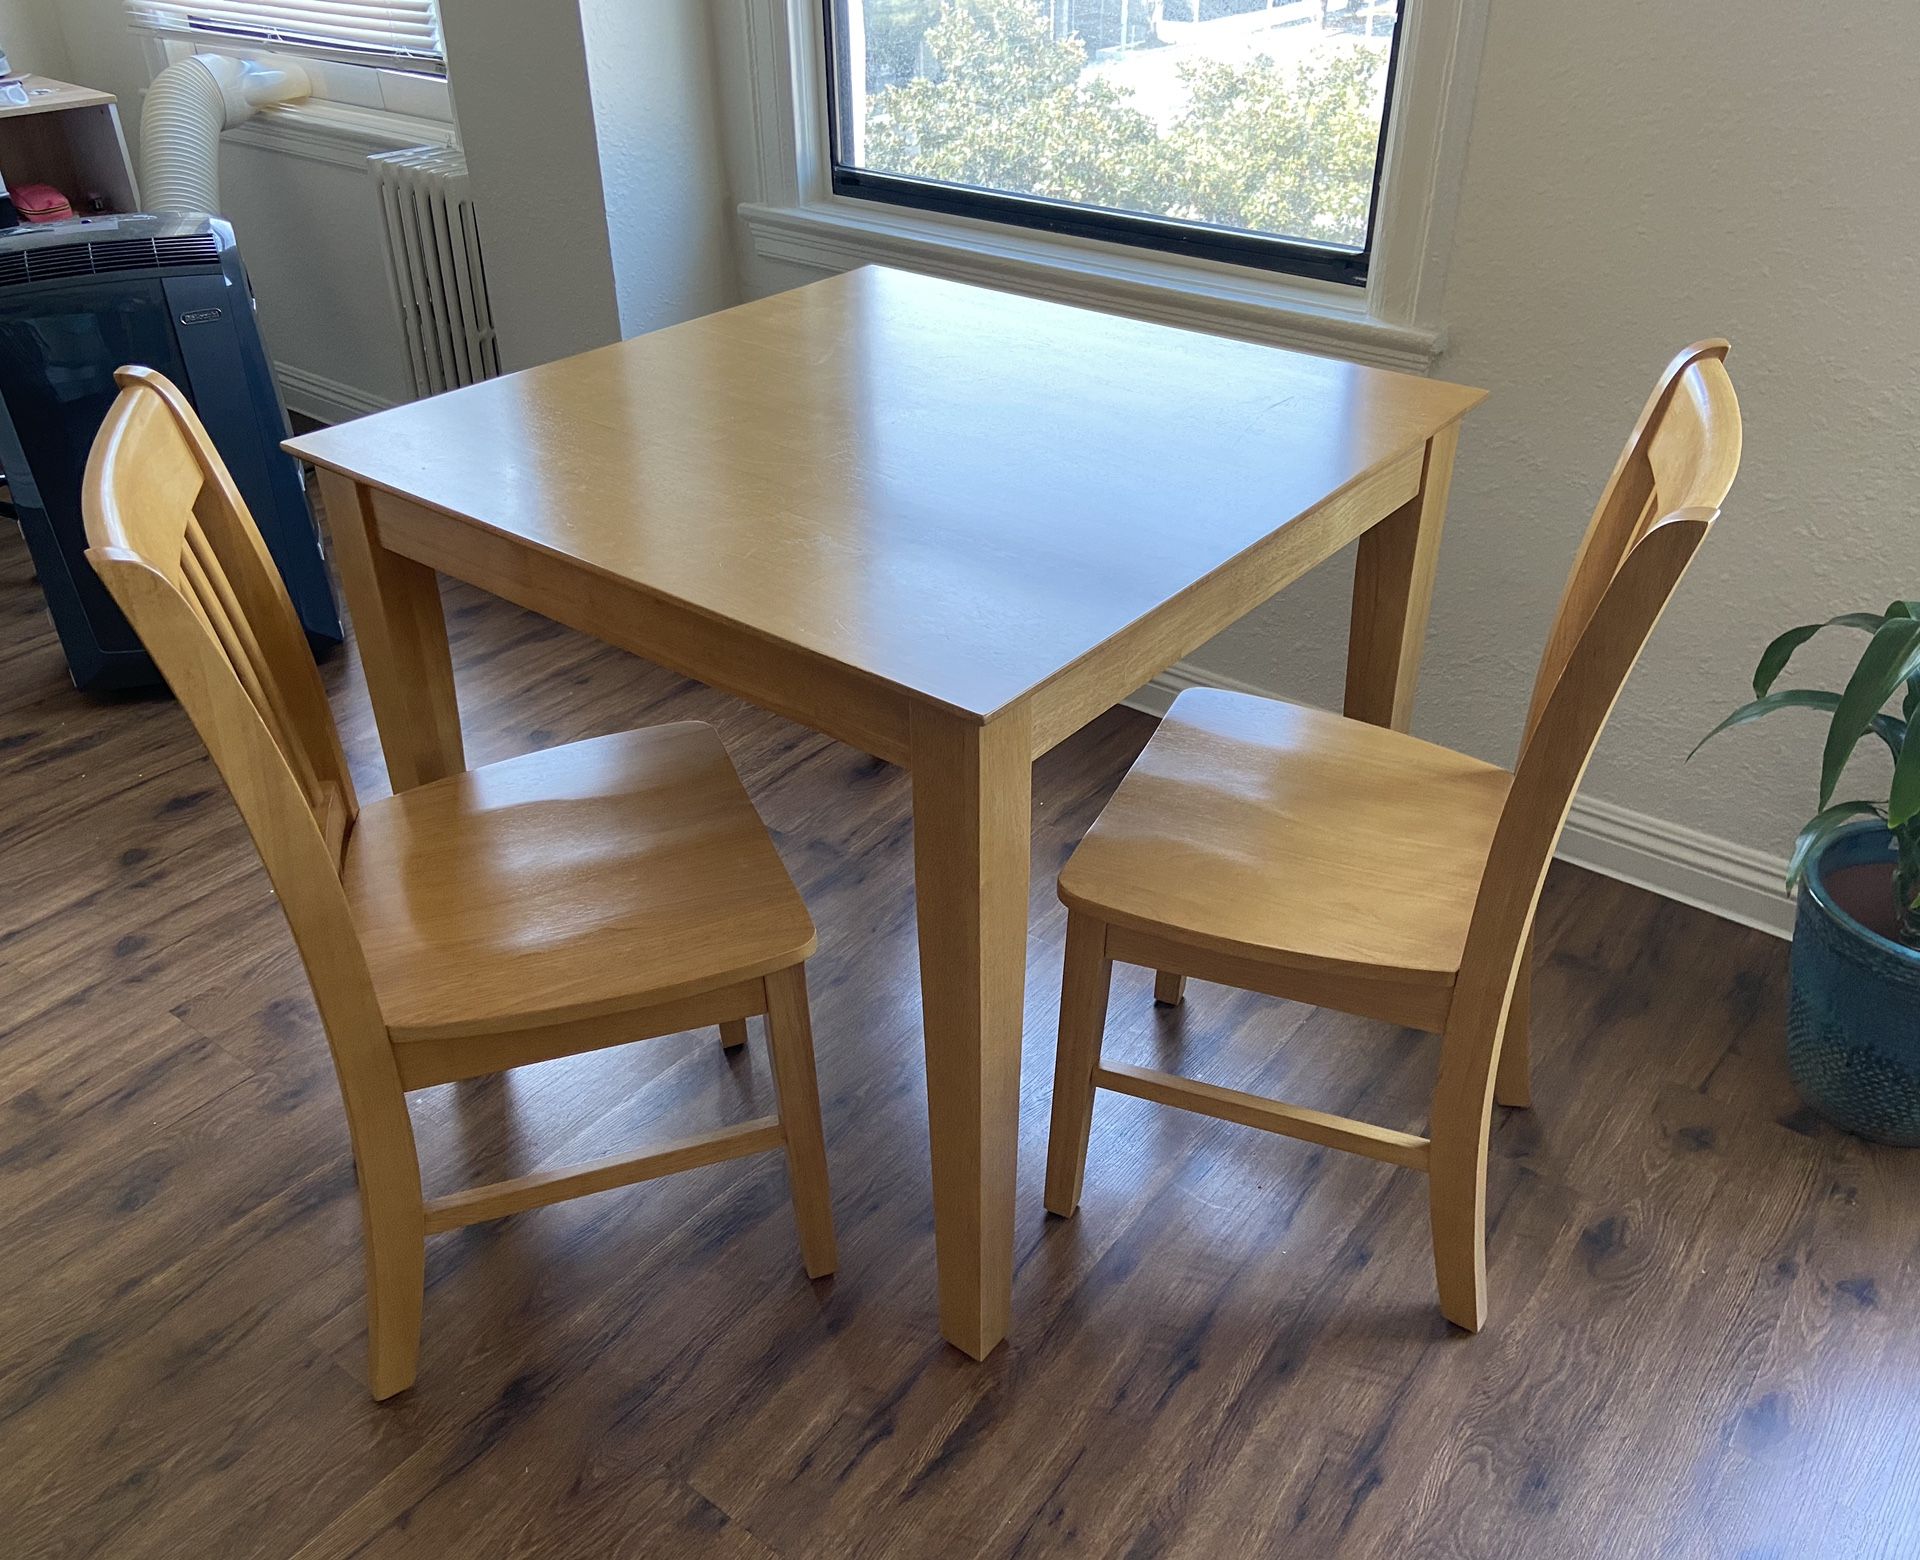 3 pc small kitchen table set - square table and 2 dinette chairs